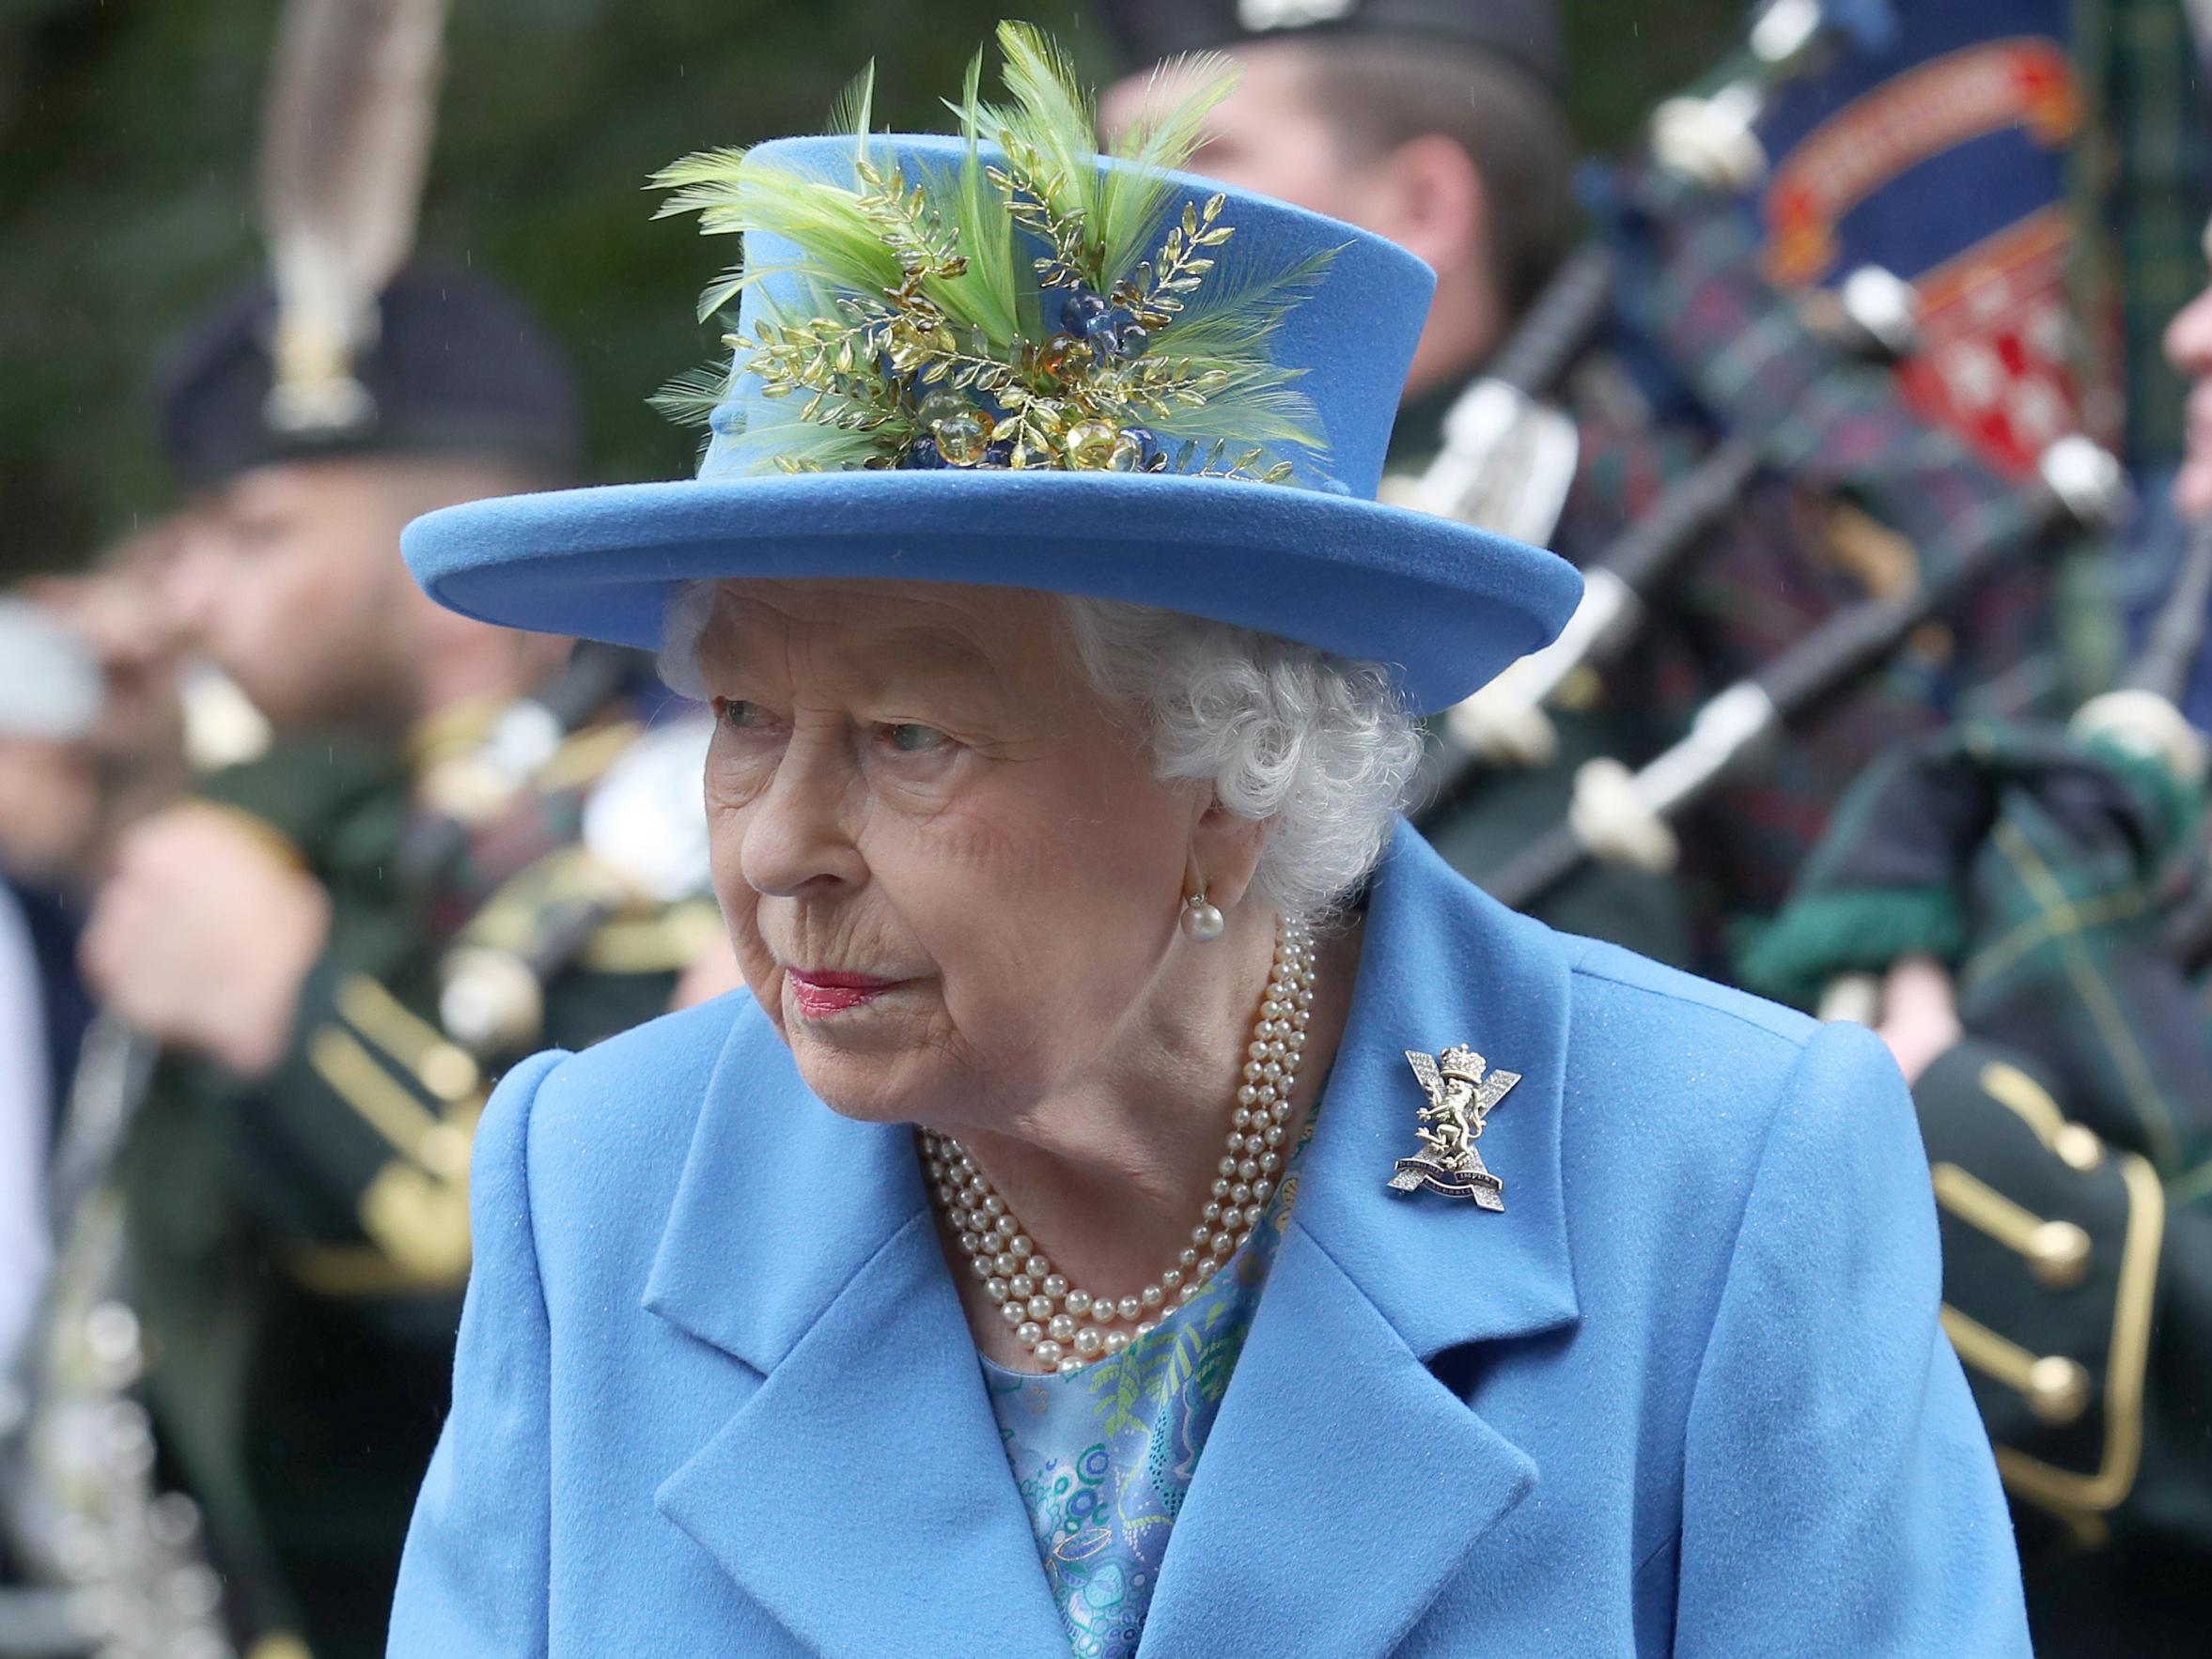 Queen Elizabeth II topped a list of celebrities who the public want to see in their private lives